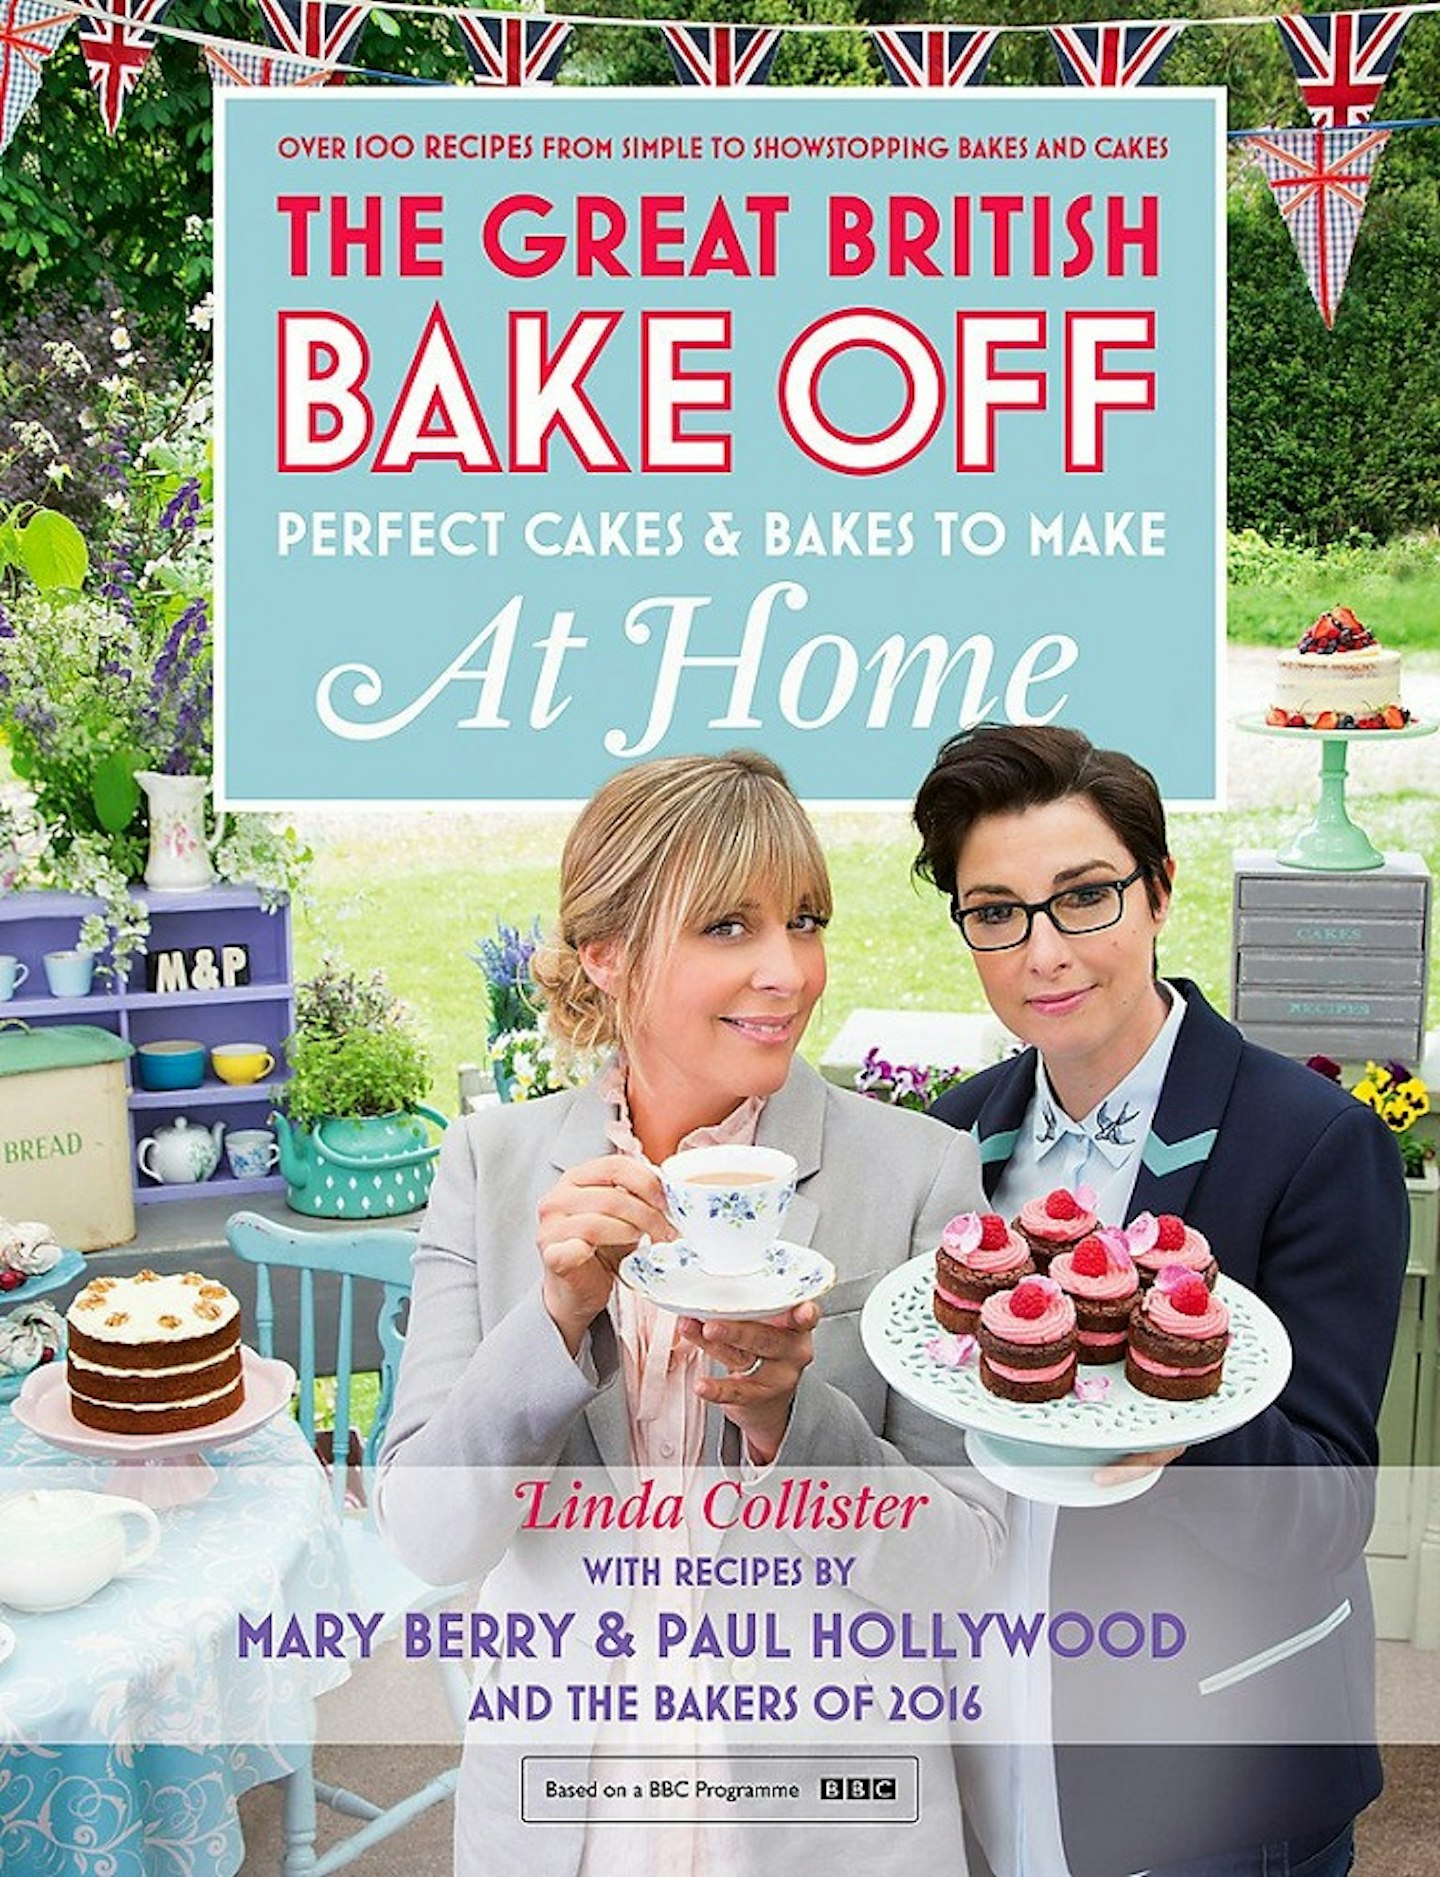 Great British Bake Off - Perfect Cakes & Bakes To Make At Home, 15.99